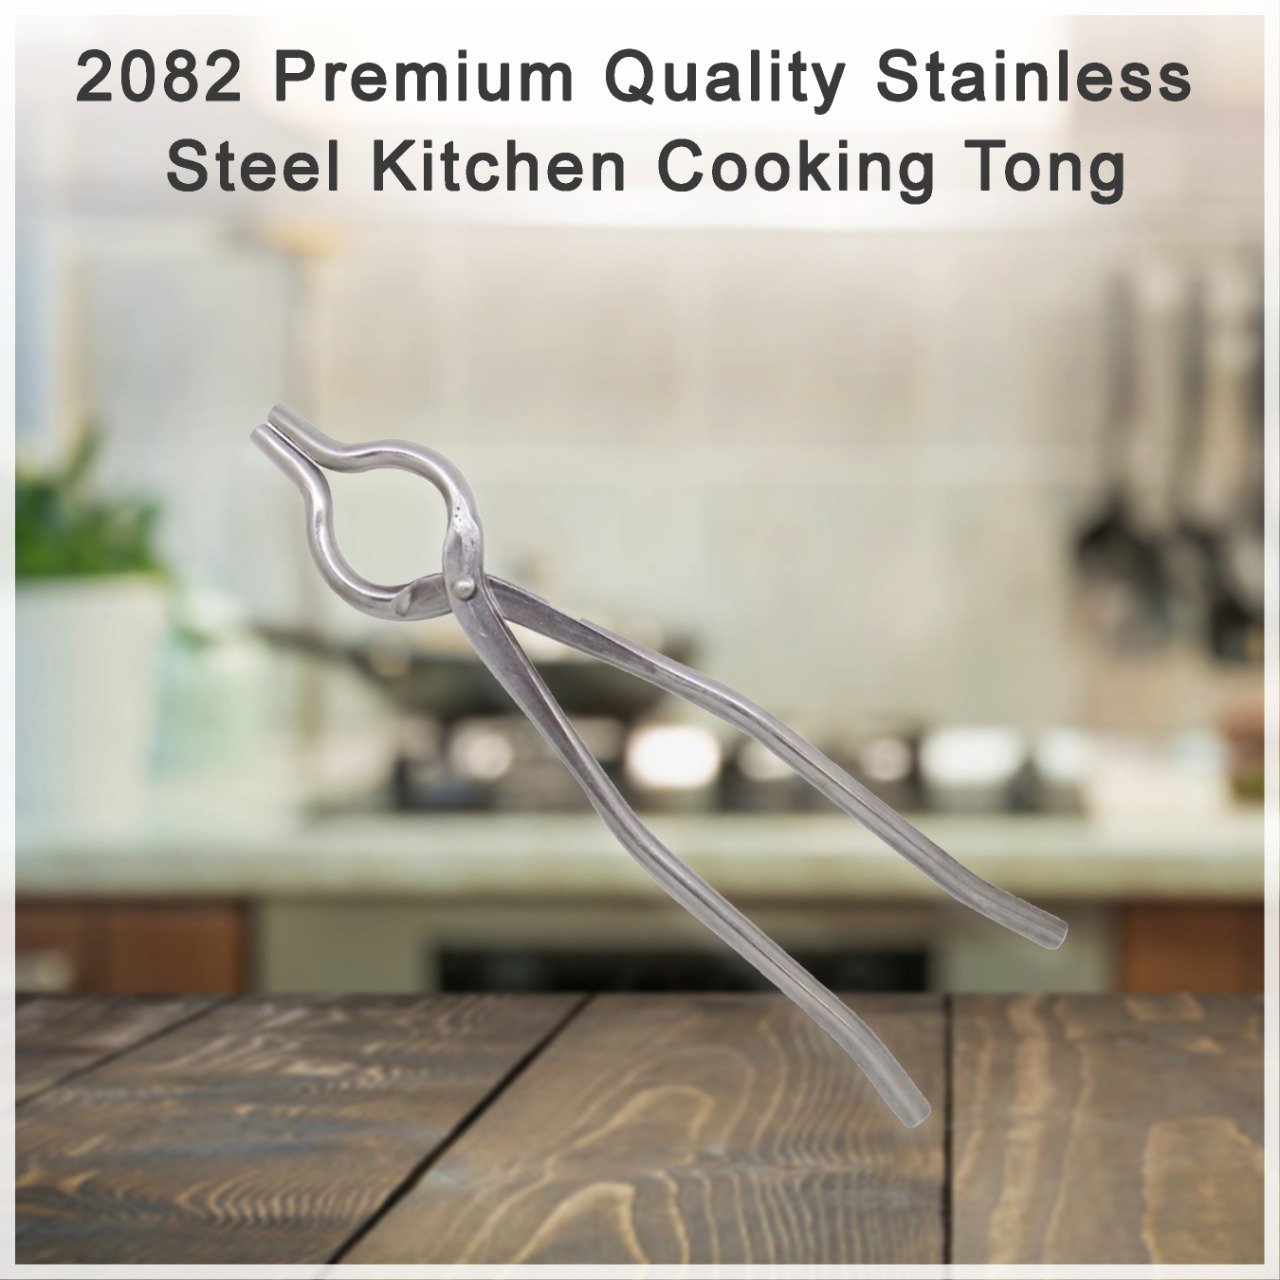 2082 Premium Quality Stainless Steel Kitchen Cooking Tong - SkyShopy